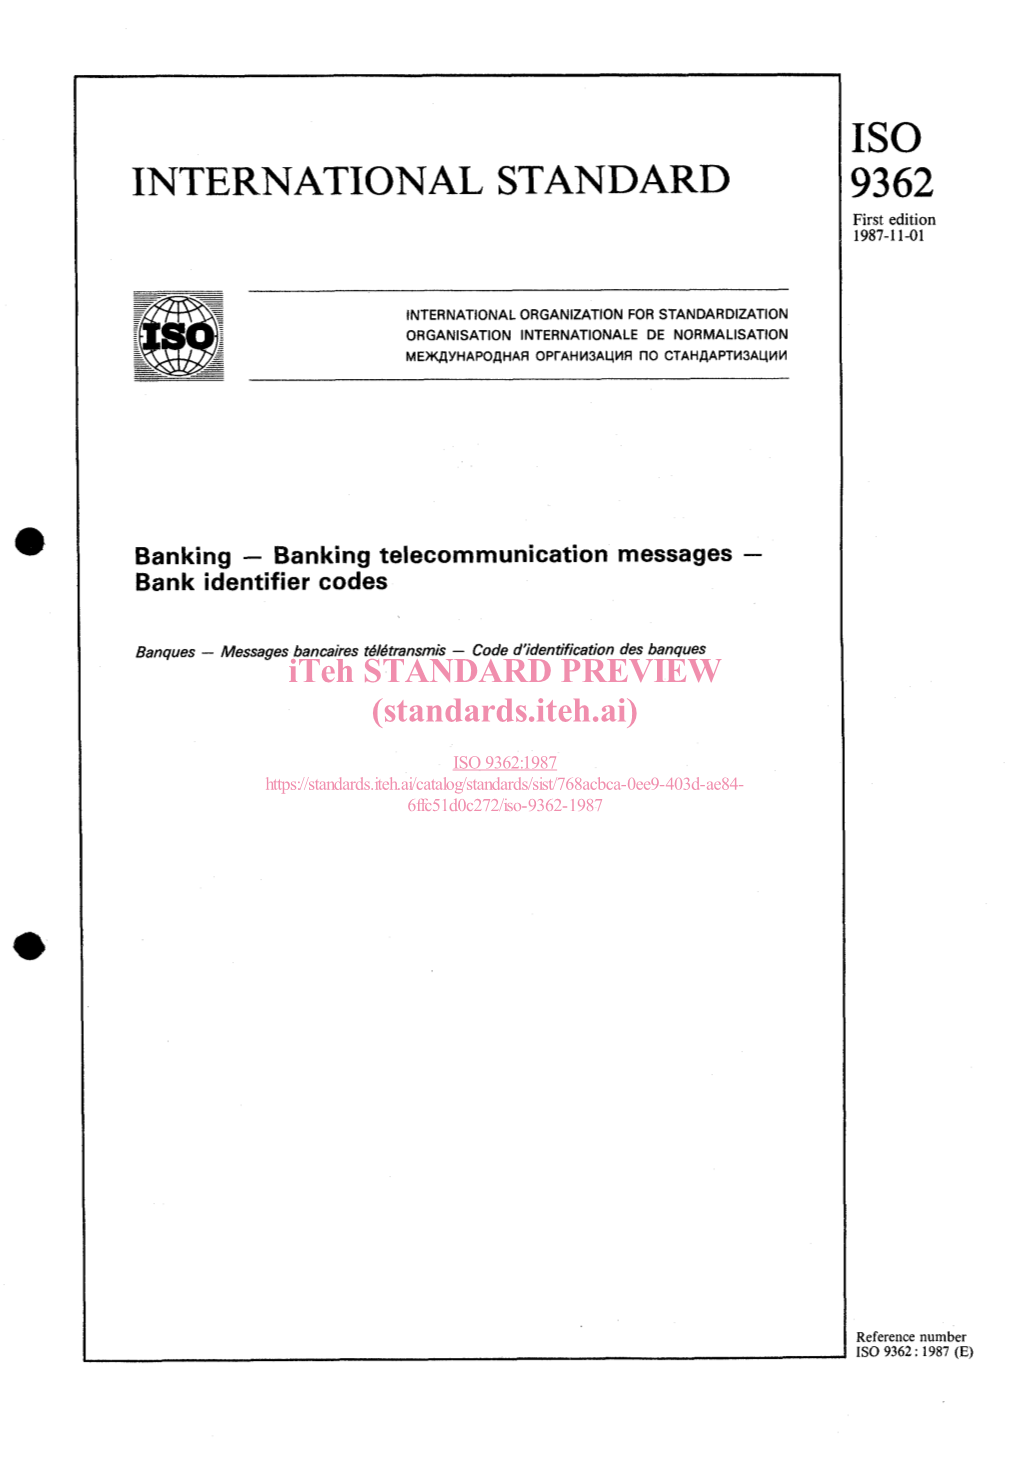 IS0 9362 Was Prepared by Technical Committee ISO/TC: 68, Banking and Related Financial Services